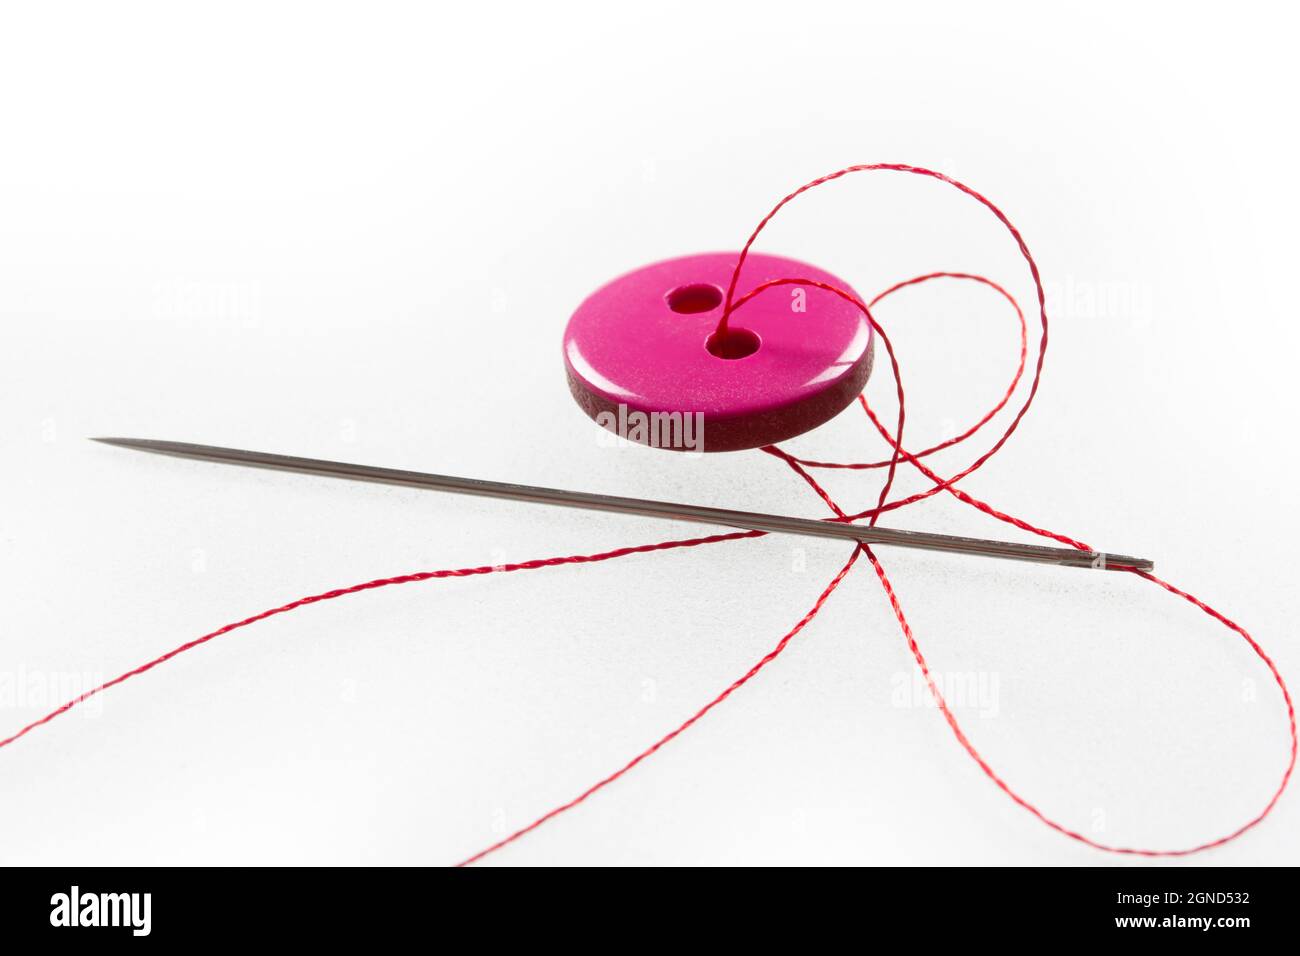 two thread holes, pink button, needle and thread Stock Photo